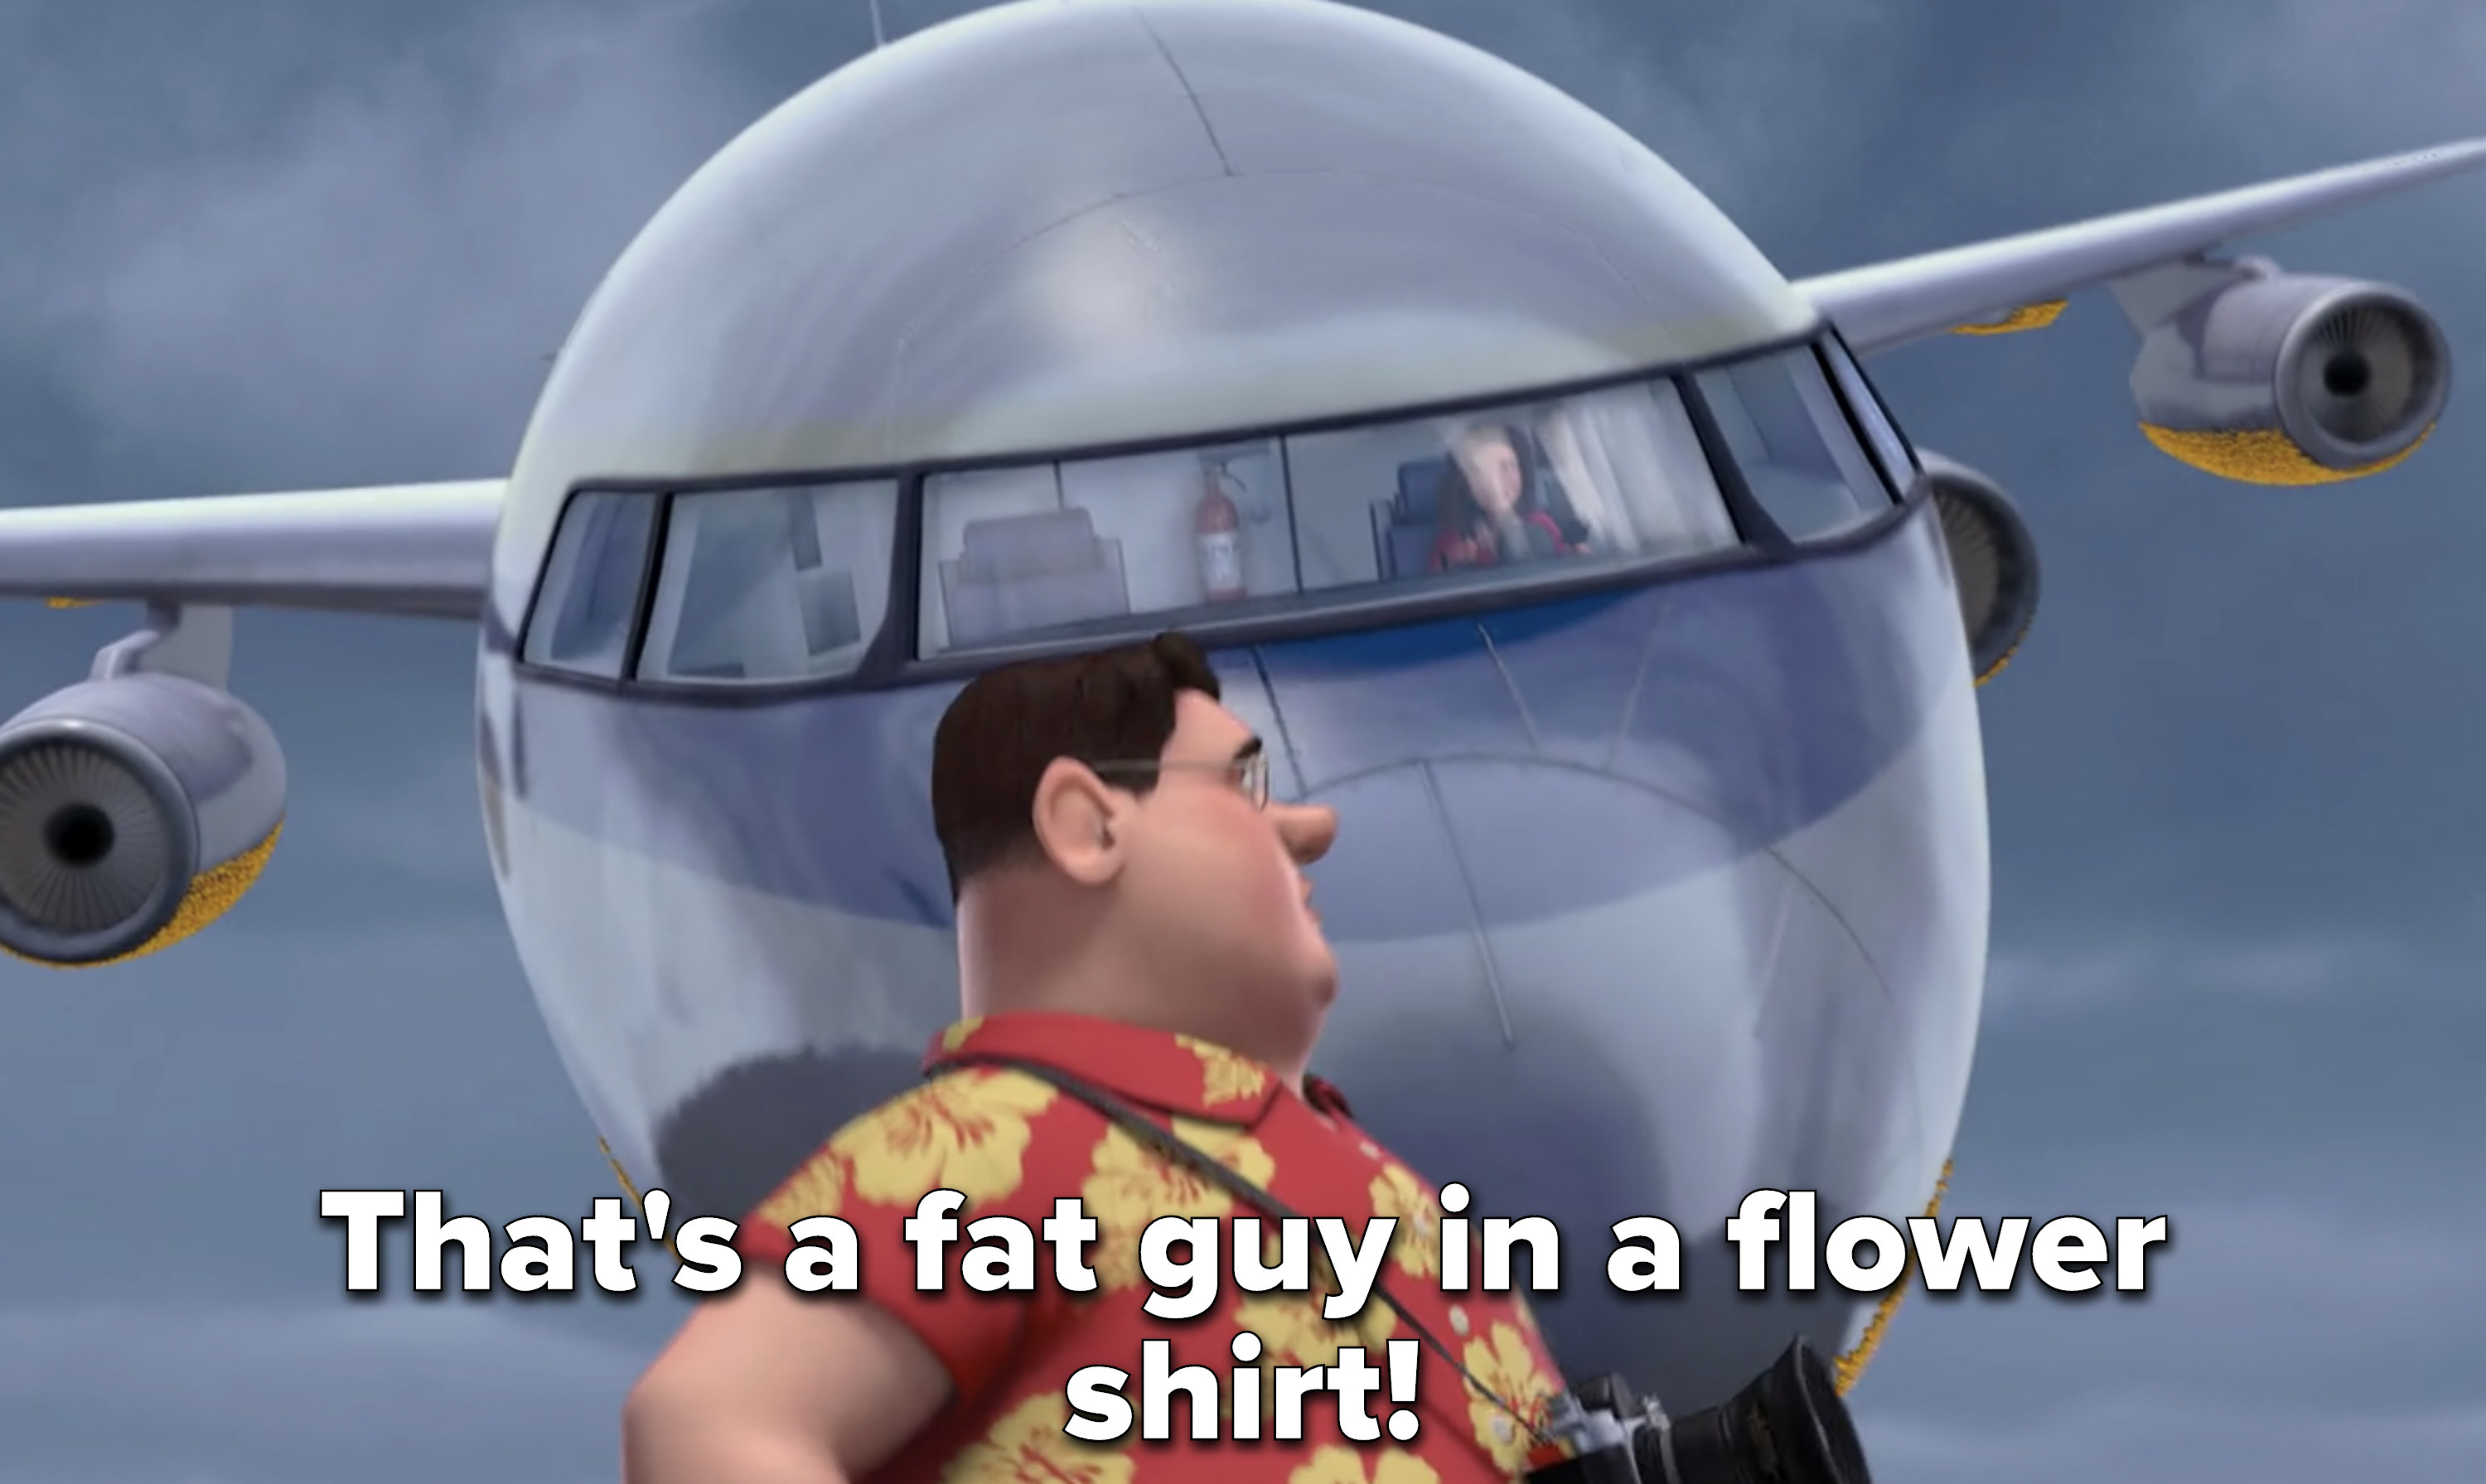 Barry says &quot;That&#x27;s a fat guy in a flower shirt!&quot;